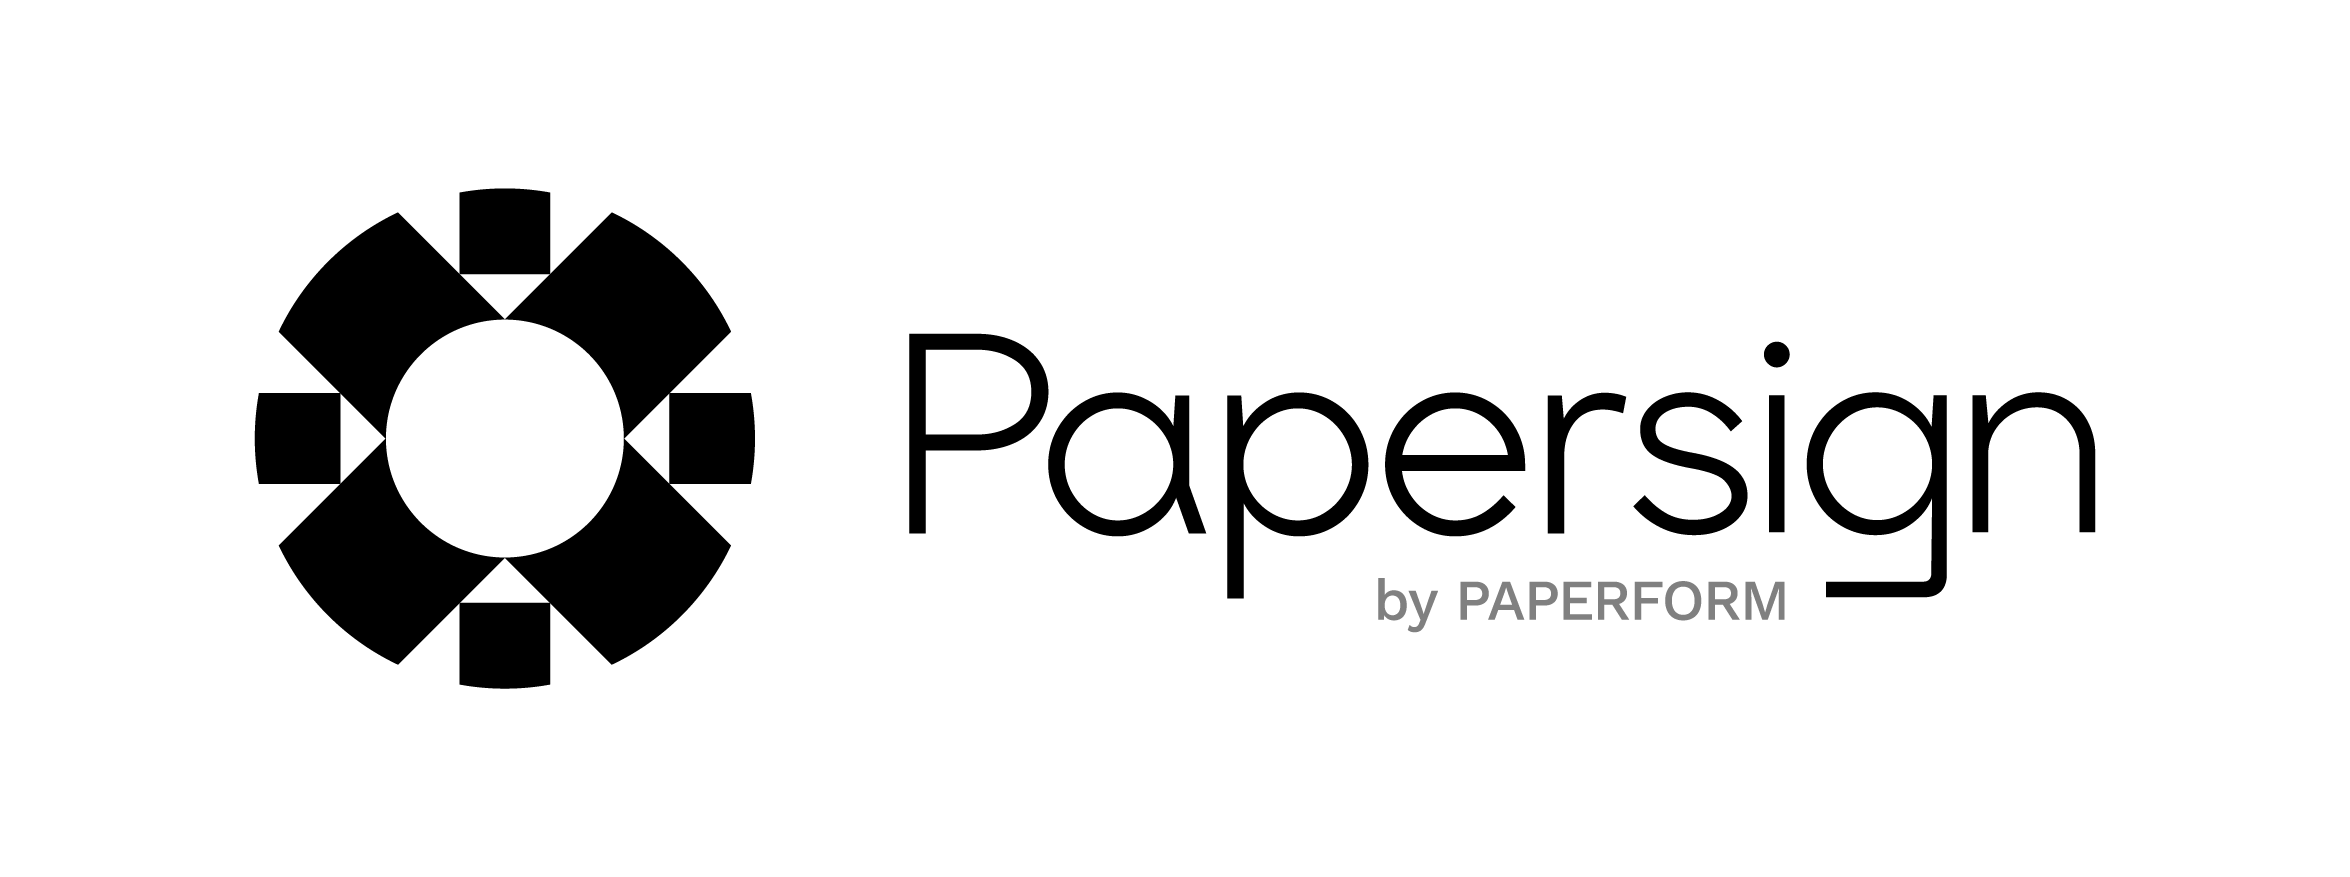 Papersign logo